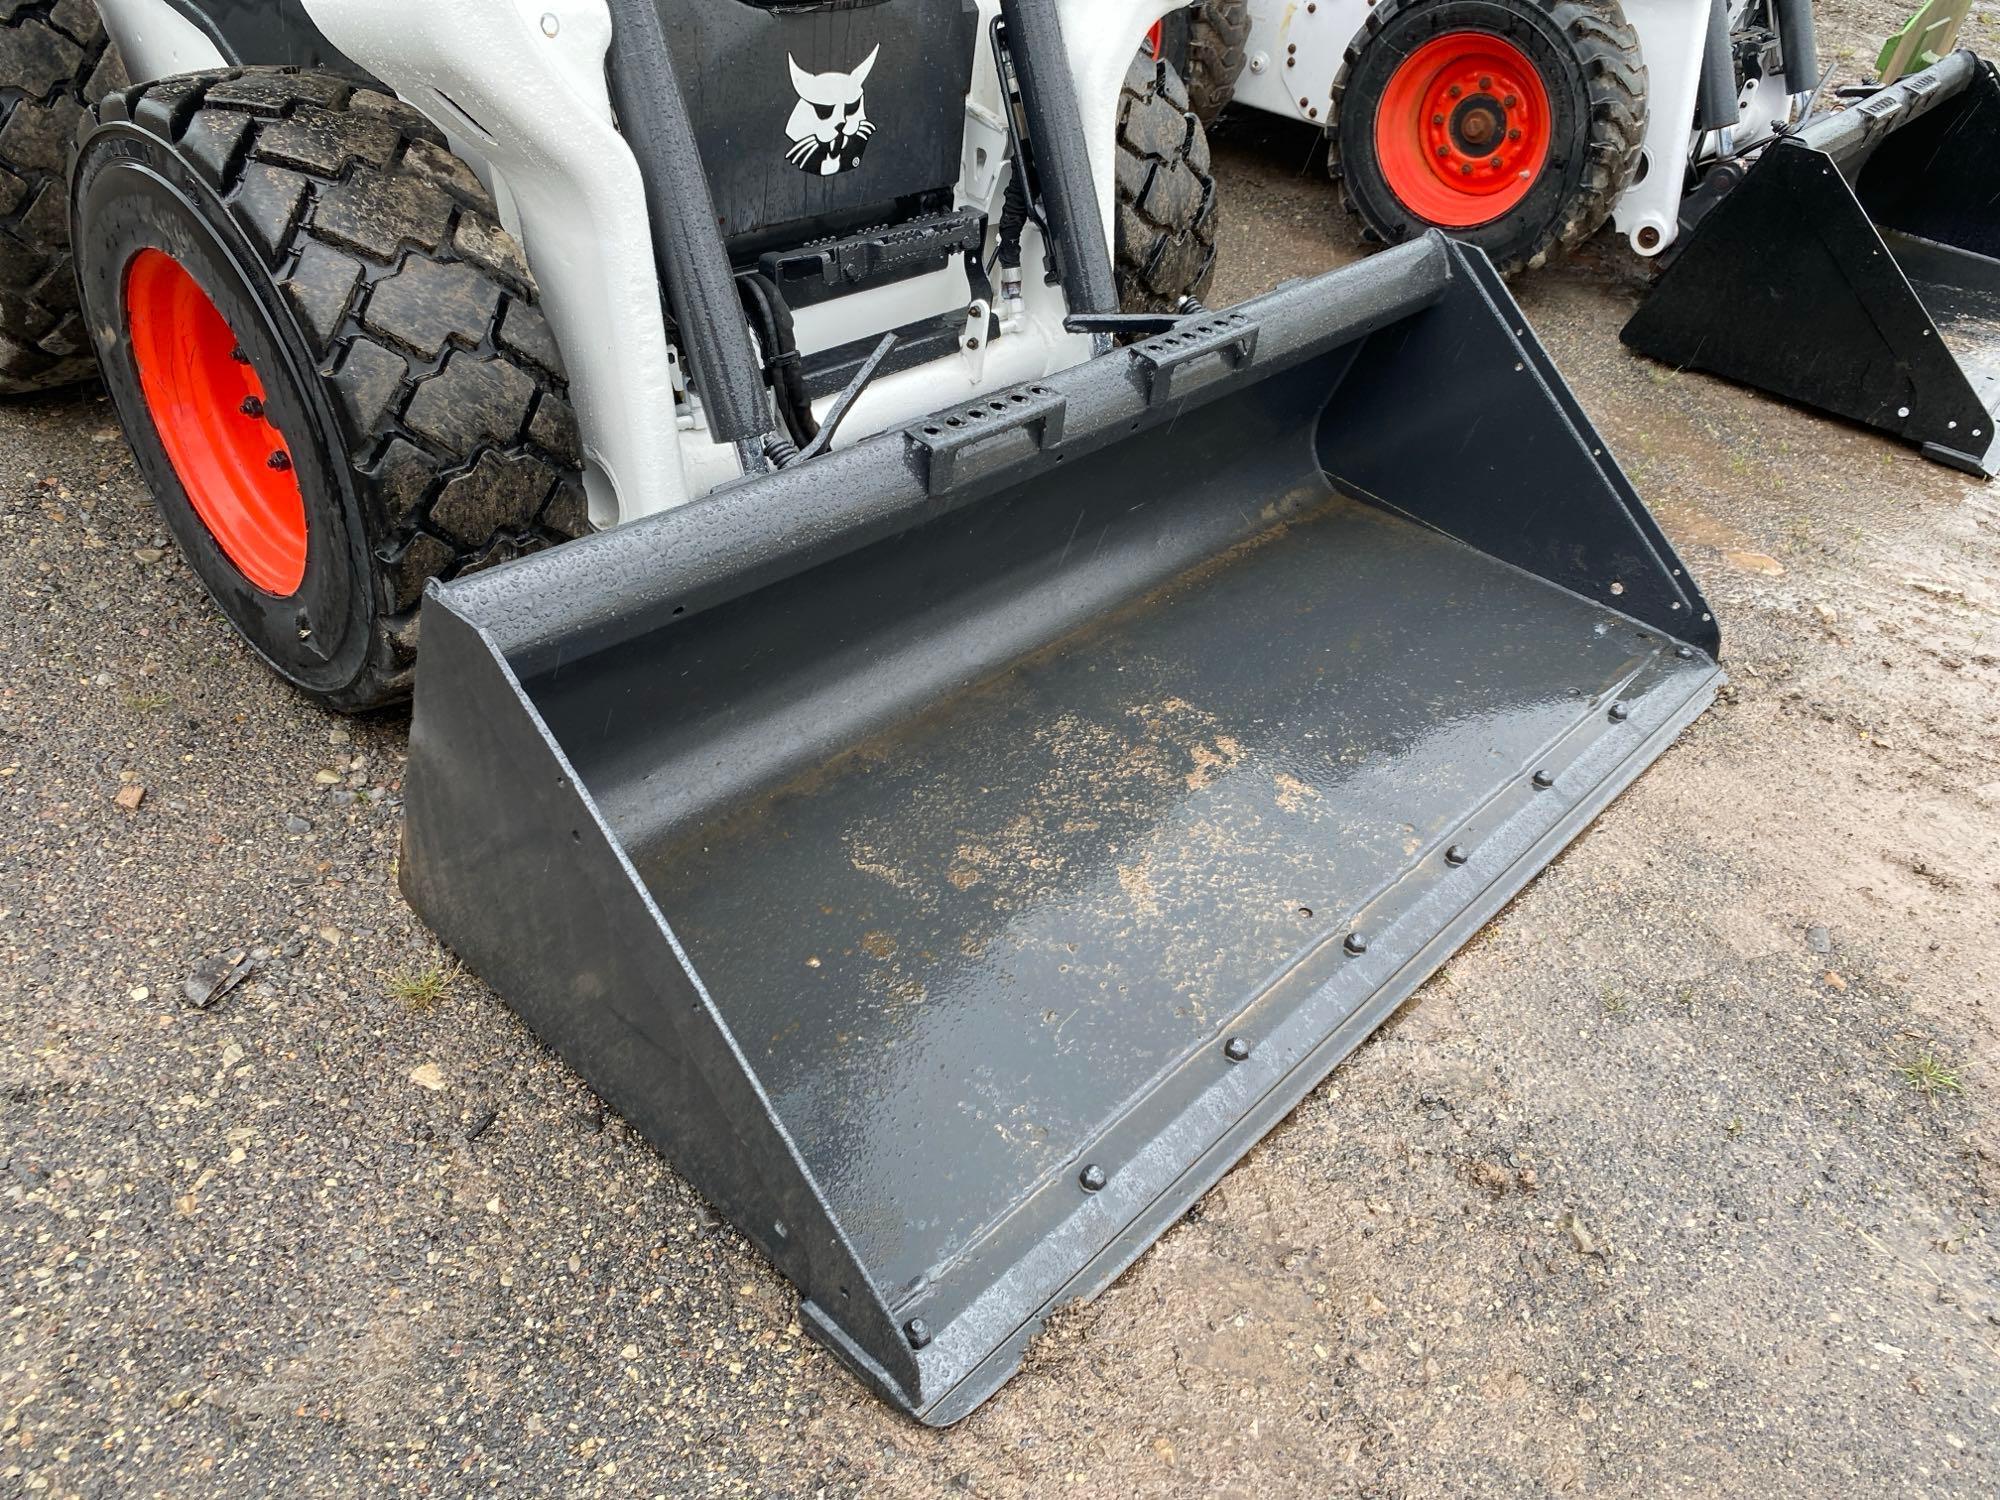 2020 BOBCAT S66 SKID STEER SN:B4SA11211 powered by diesel engine, equipped with EROPS, air, heat,